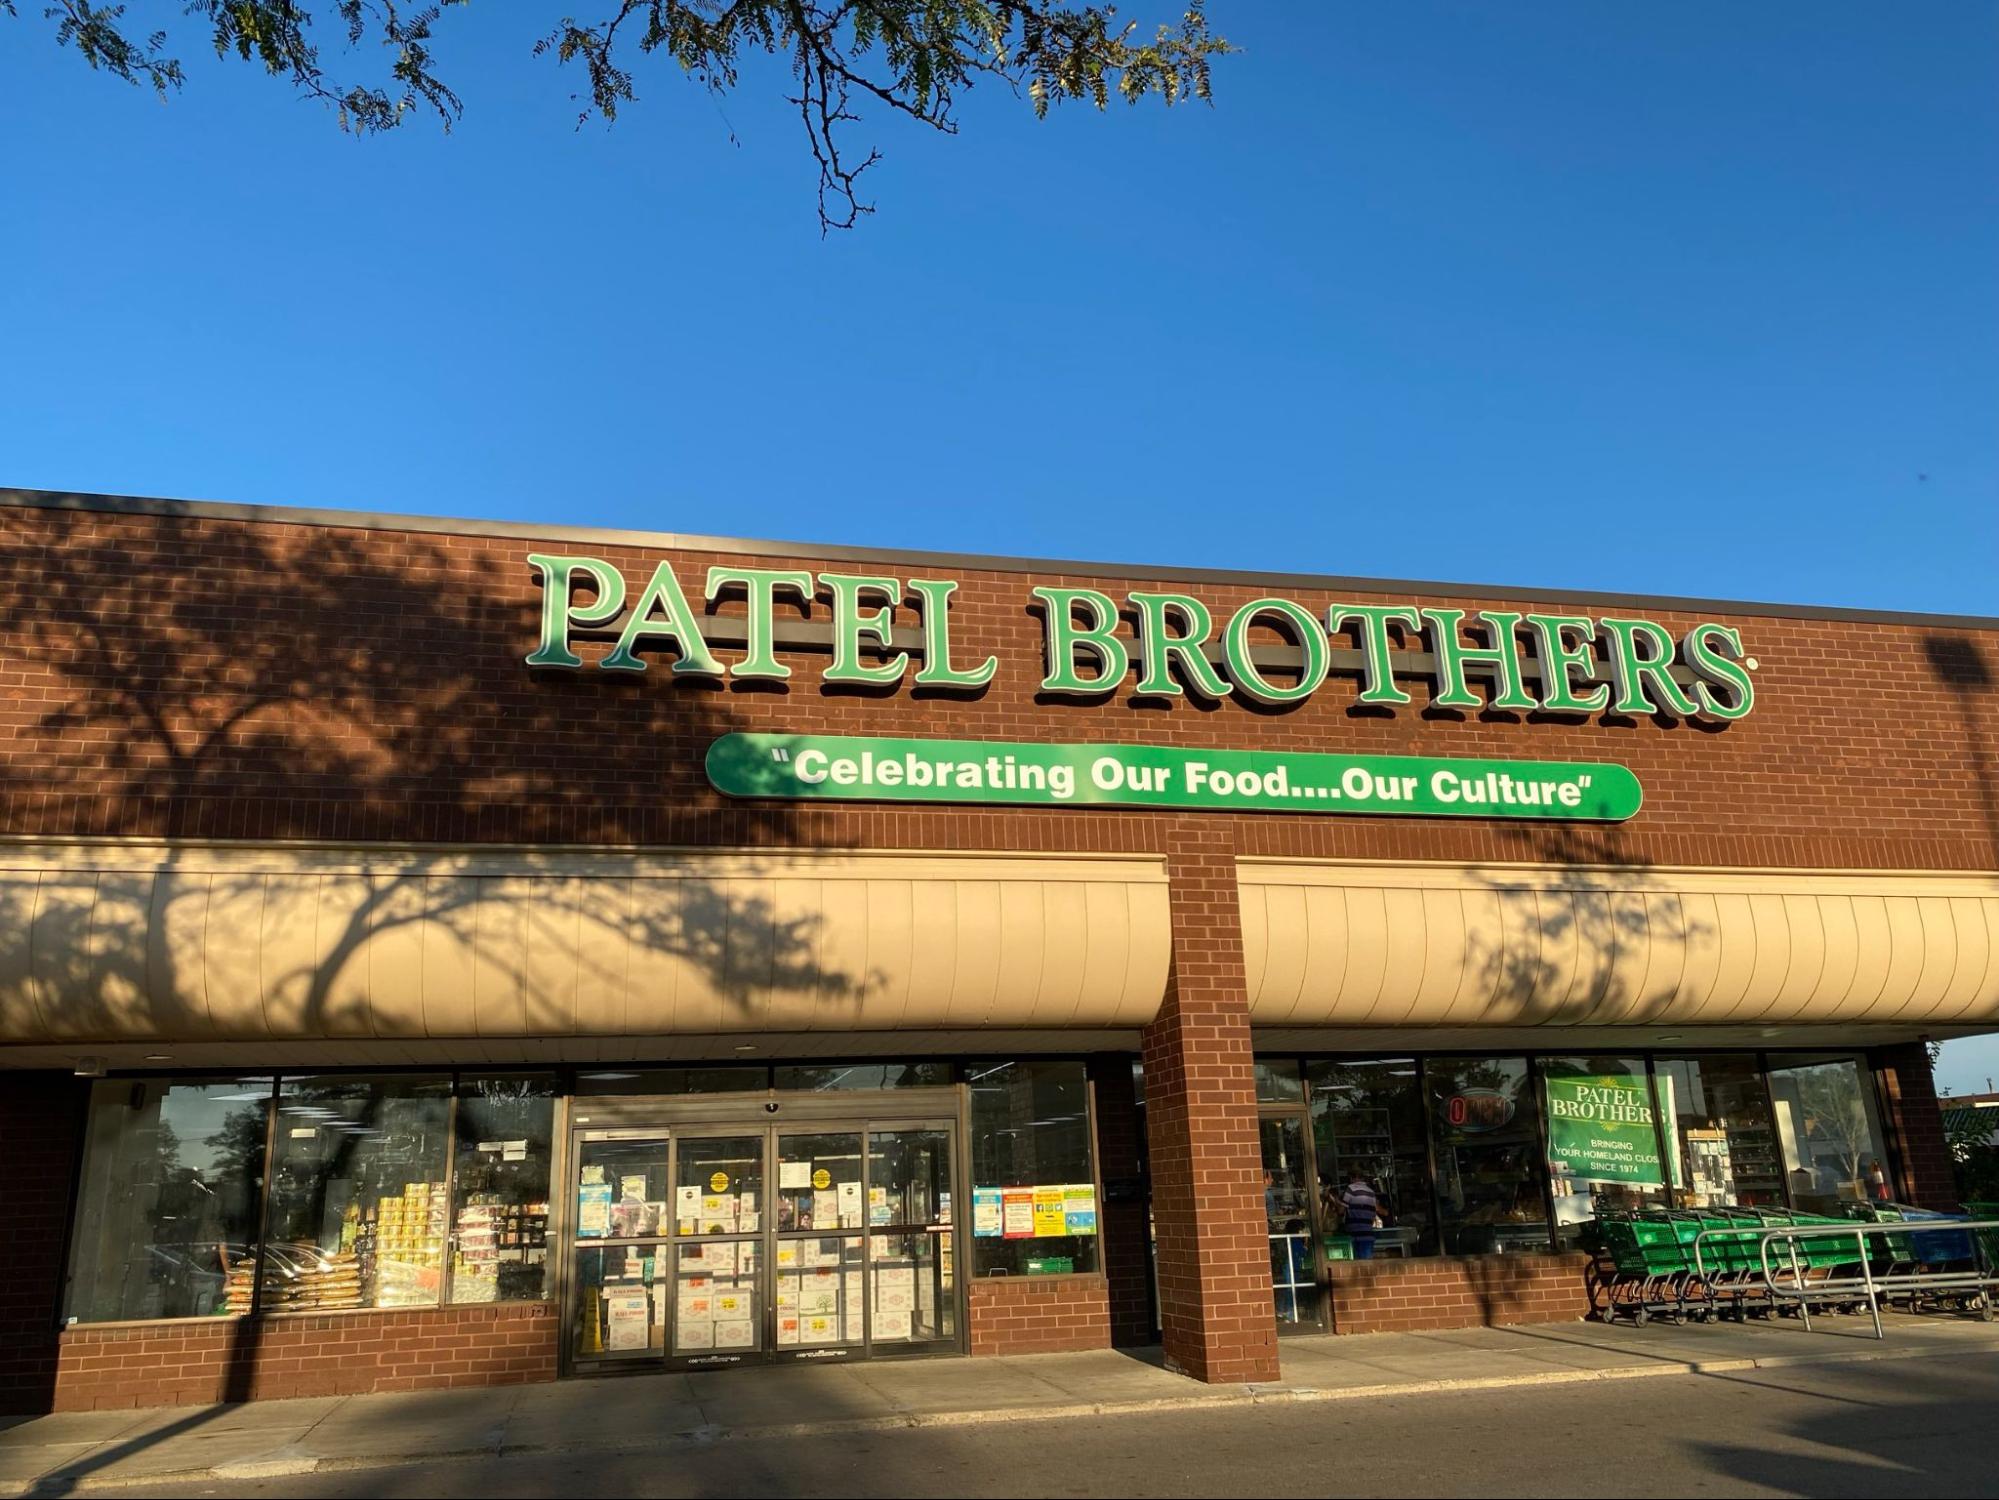 Patel Brothers, an Indian grocery store in Iselin, New Jersey